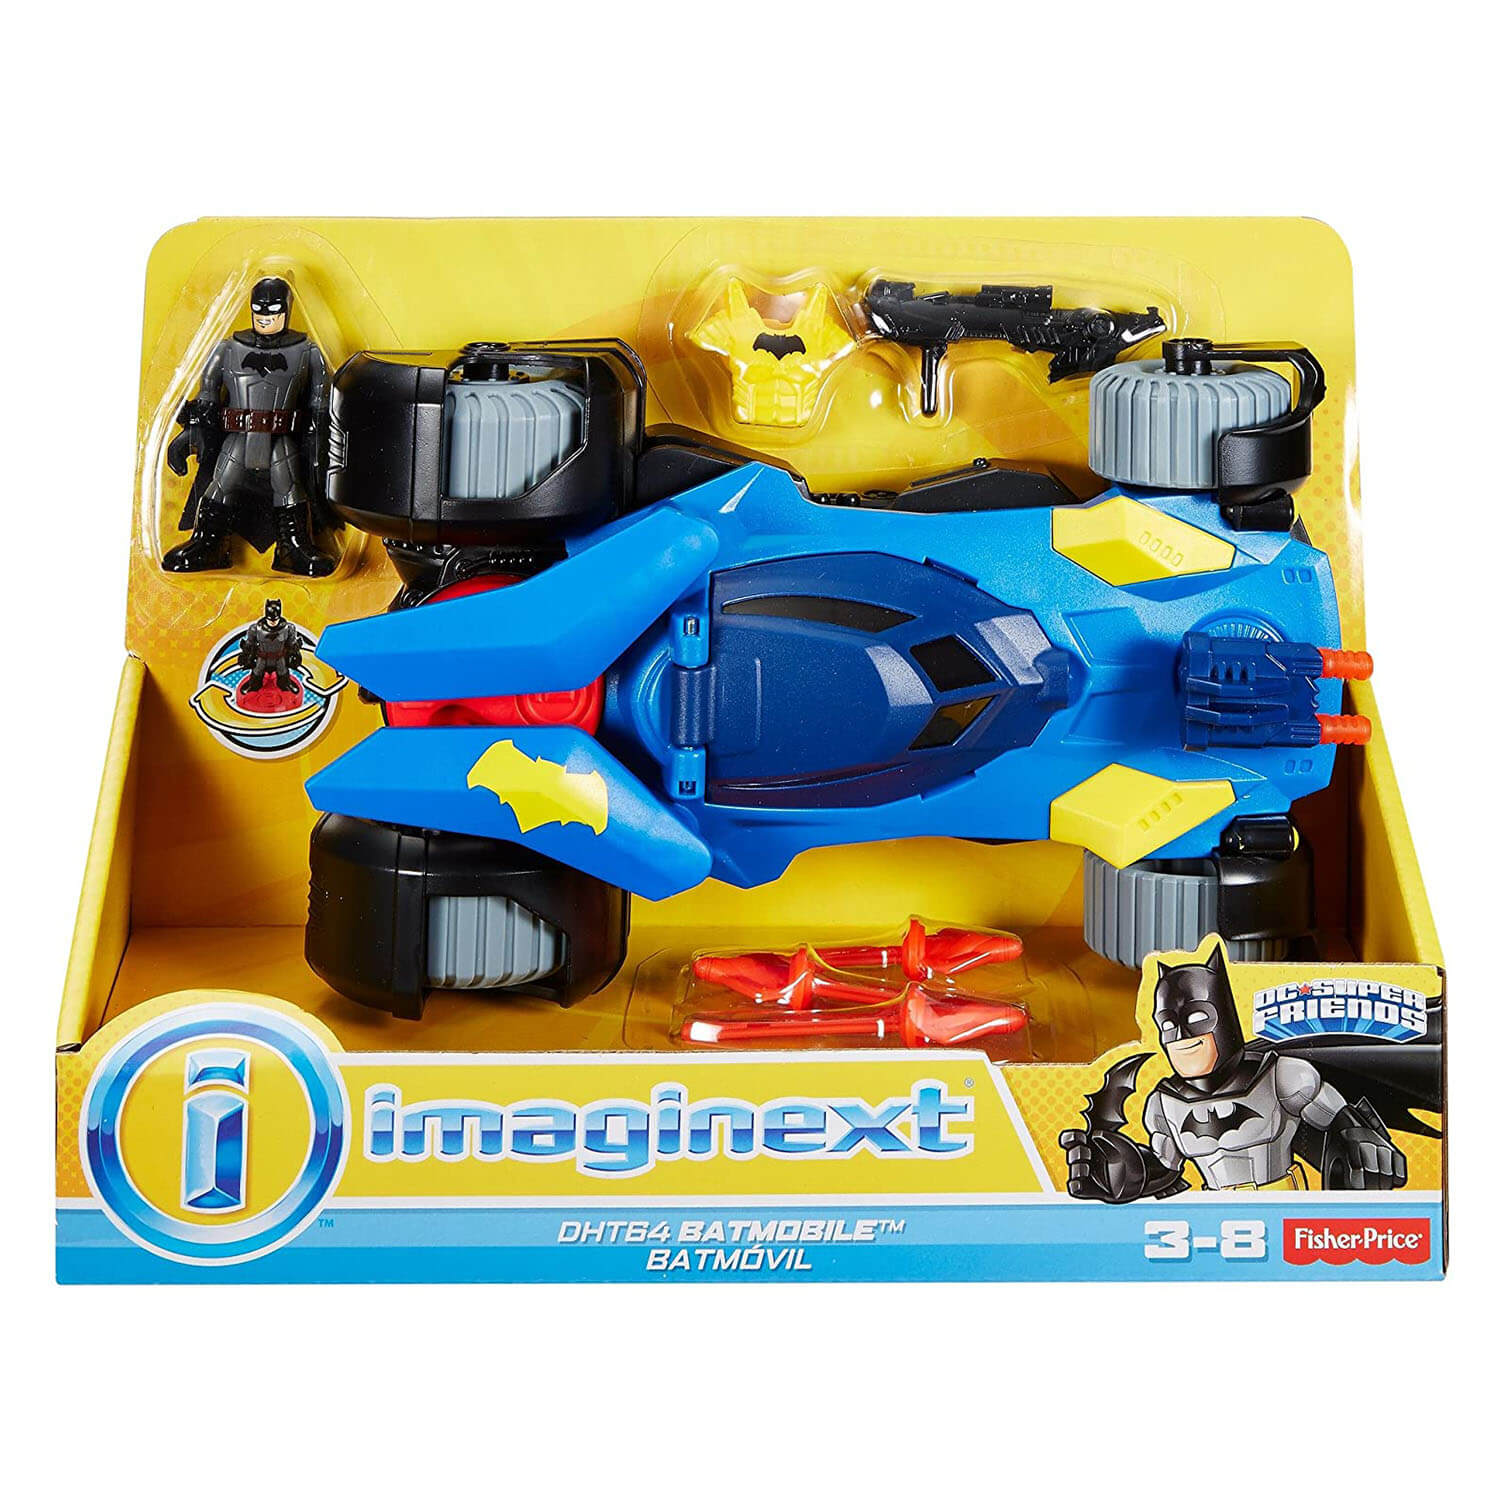 Front view of the Imaginext DC Super Friends Batmobile package.